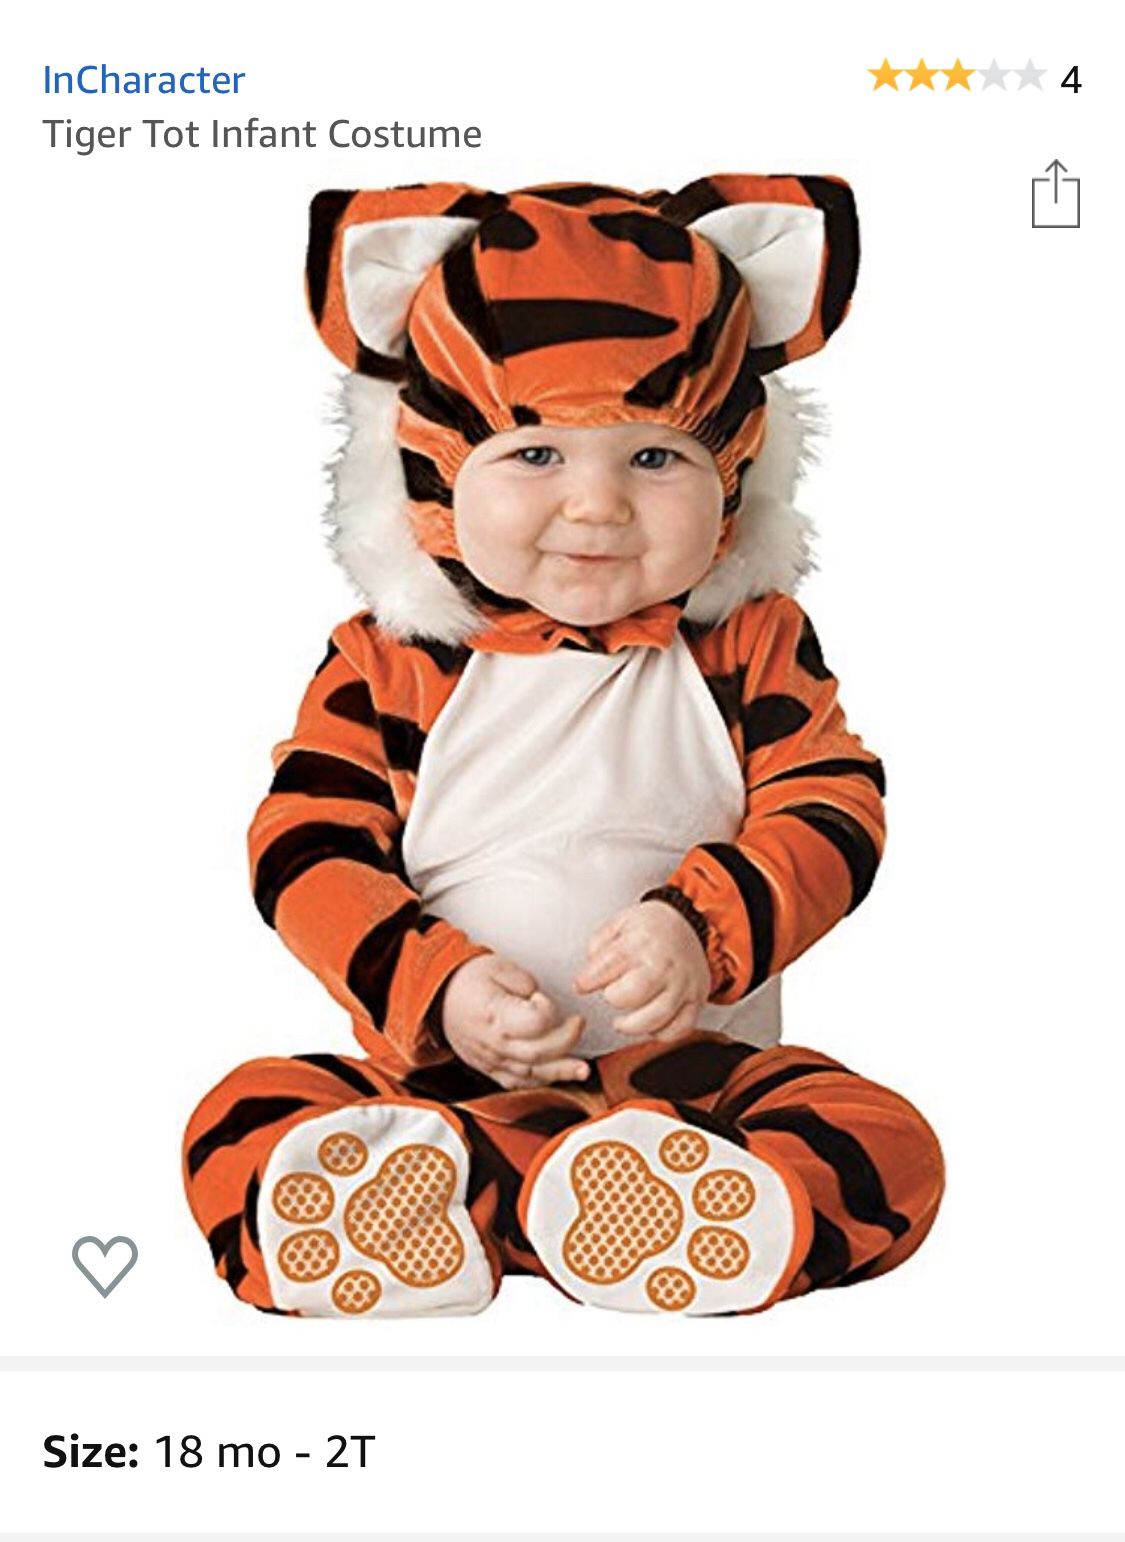 TIGER TOT INFANT COSTUME, SIZE 18MO.-2T, LIKE NEW